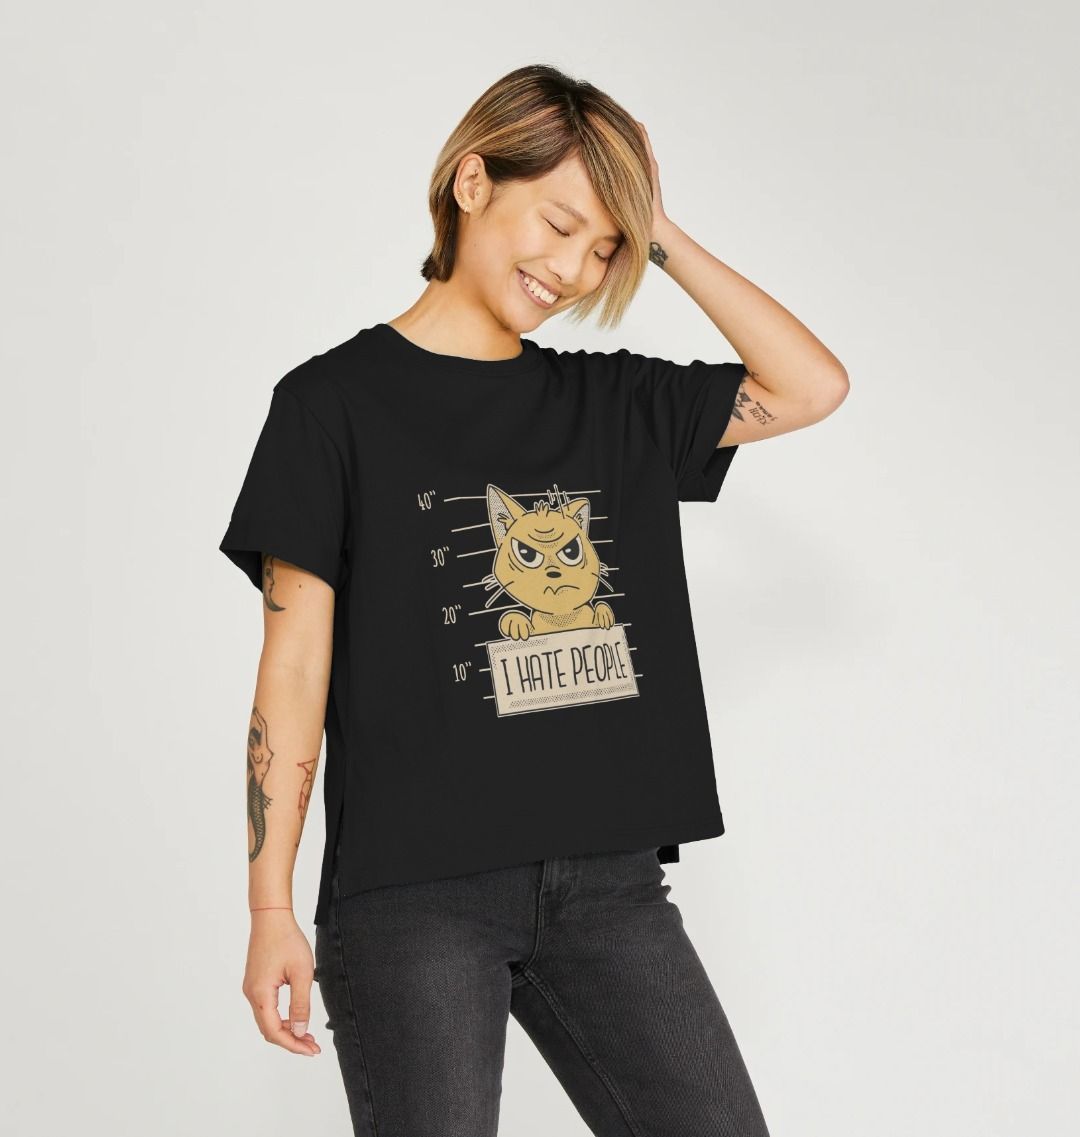 I Hate People Women's Relaxed Fit Tee